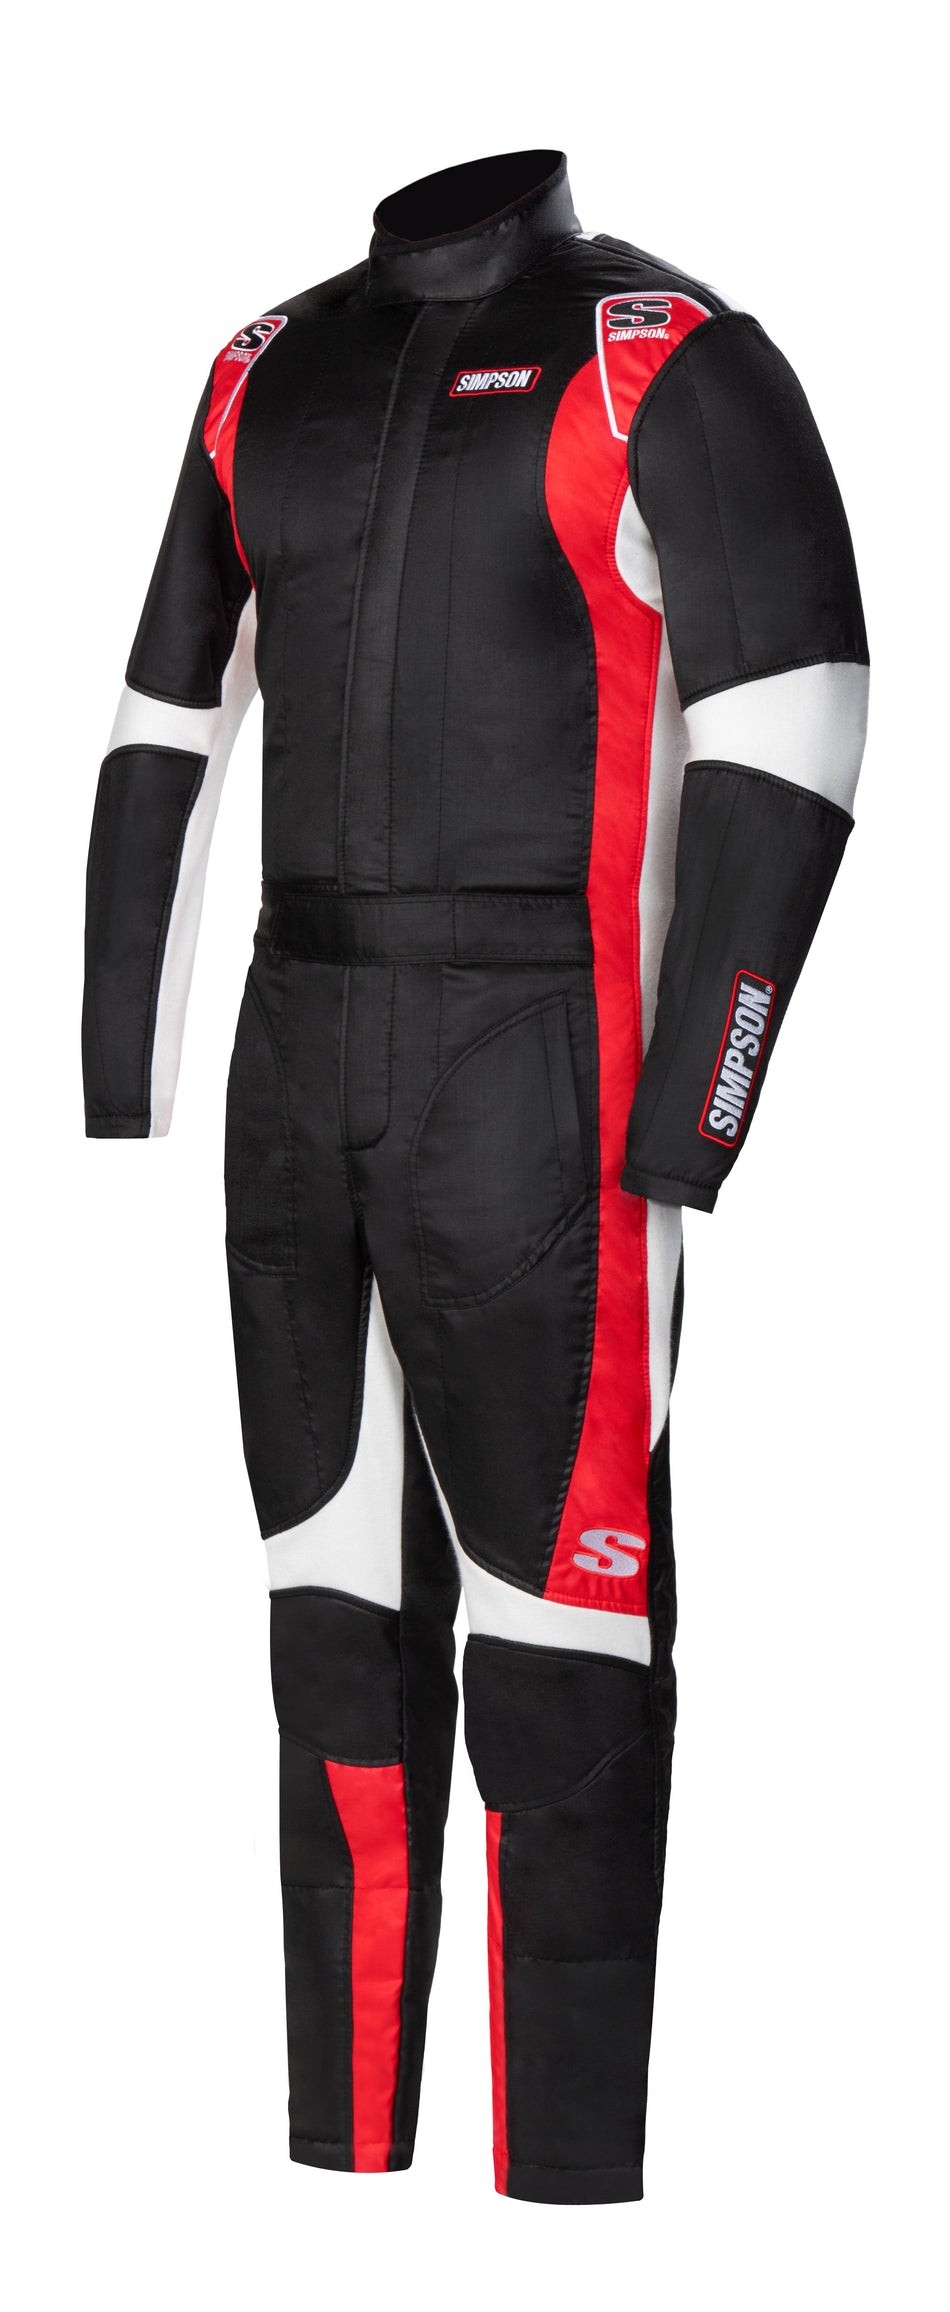 Simpson Supercoil Racing Suit - Black/White/Red